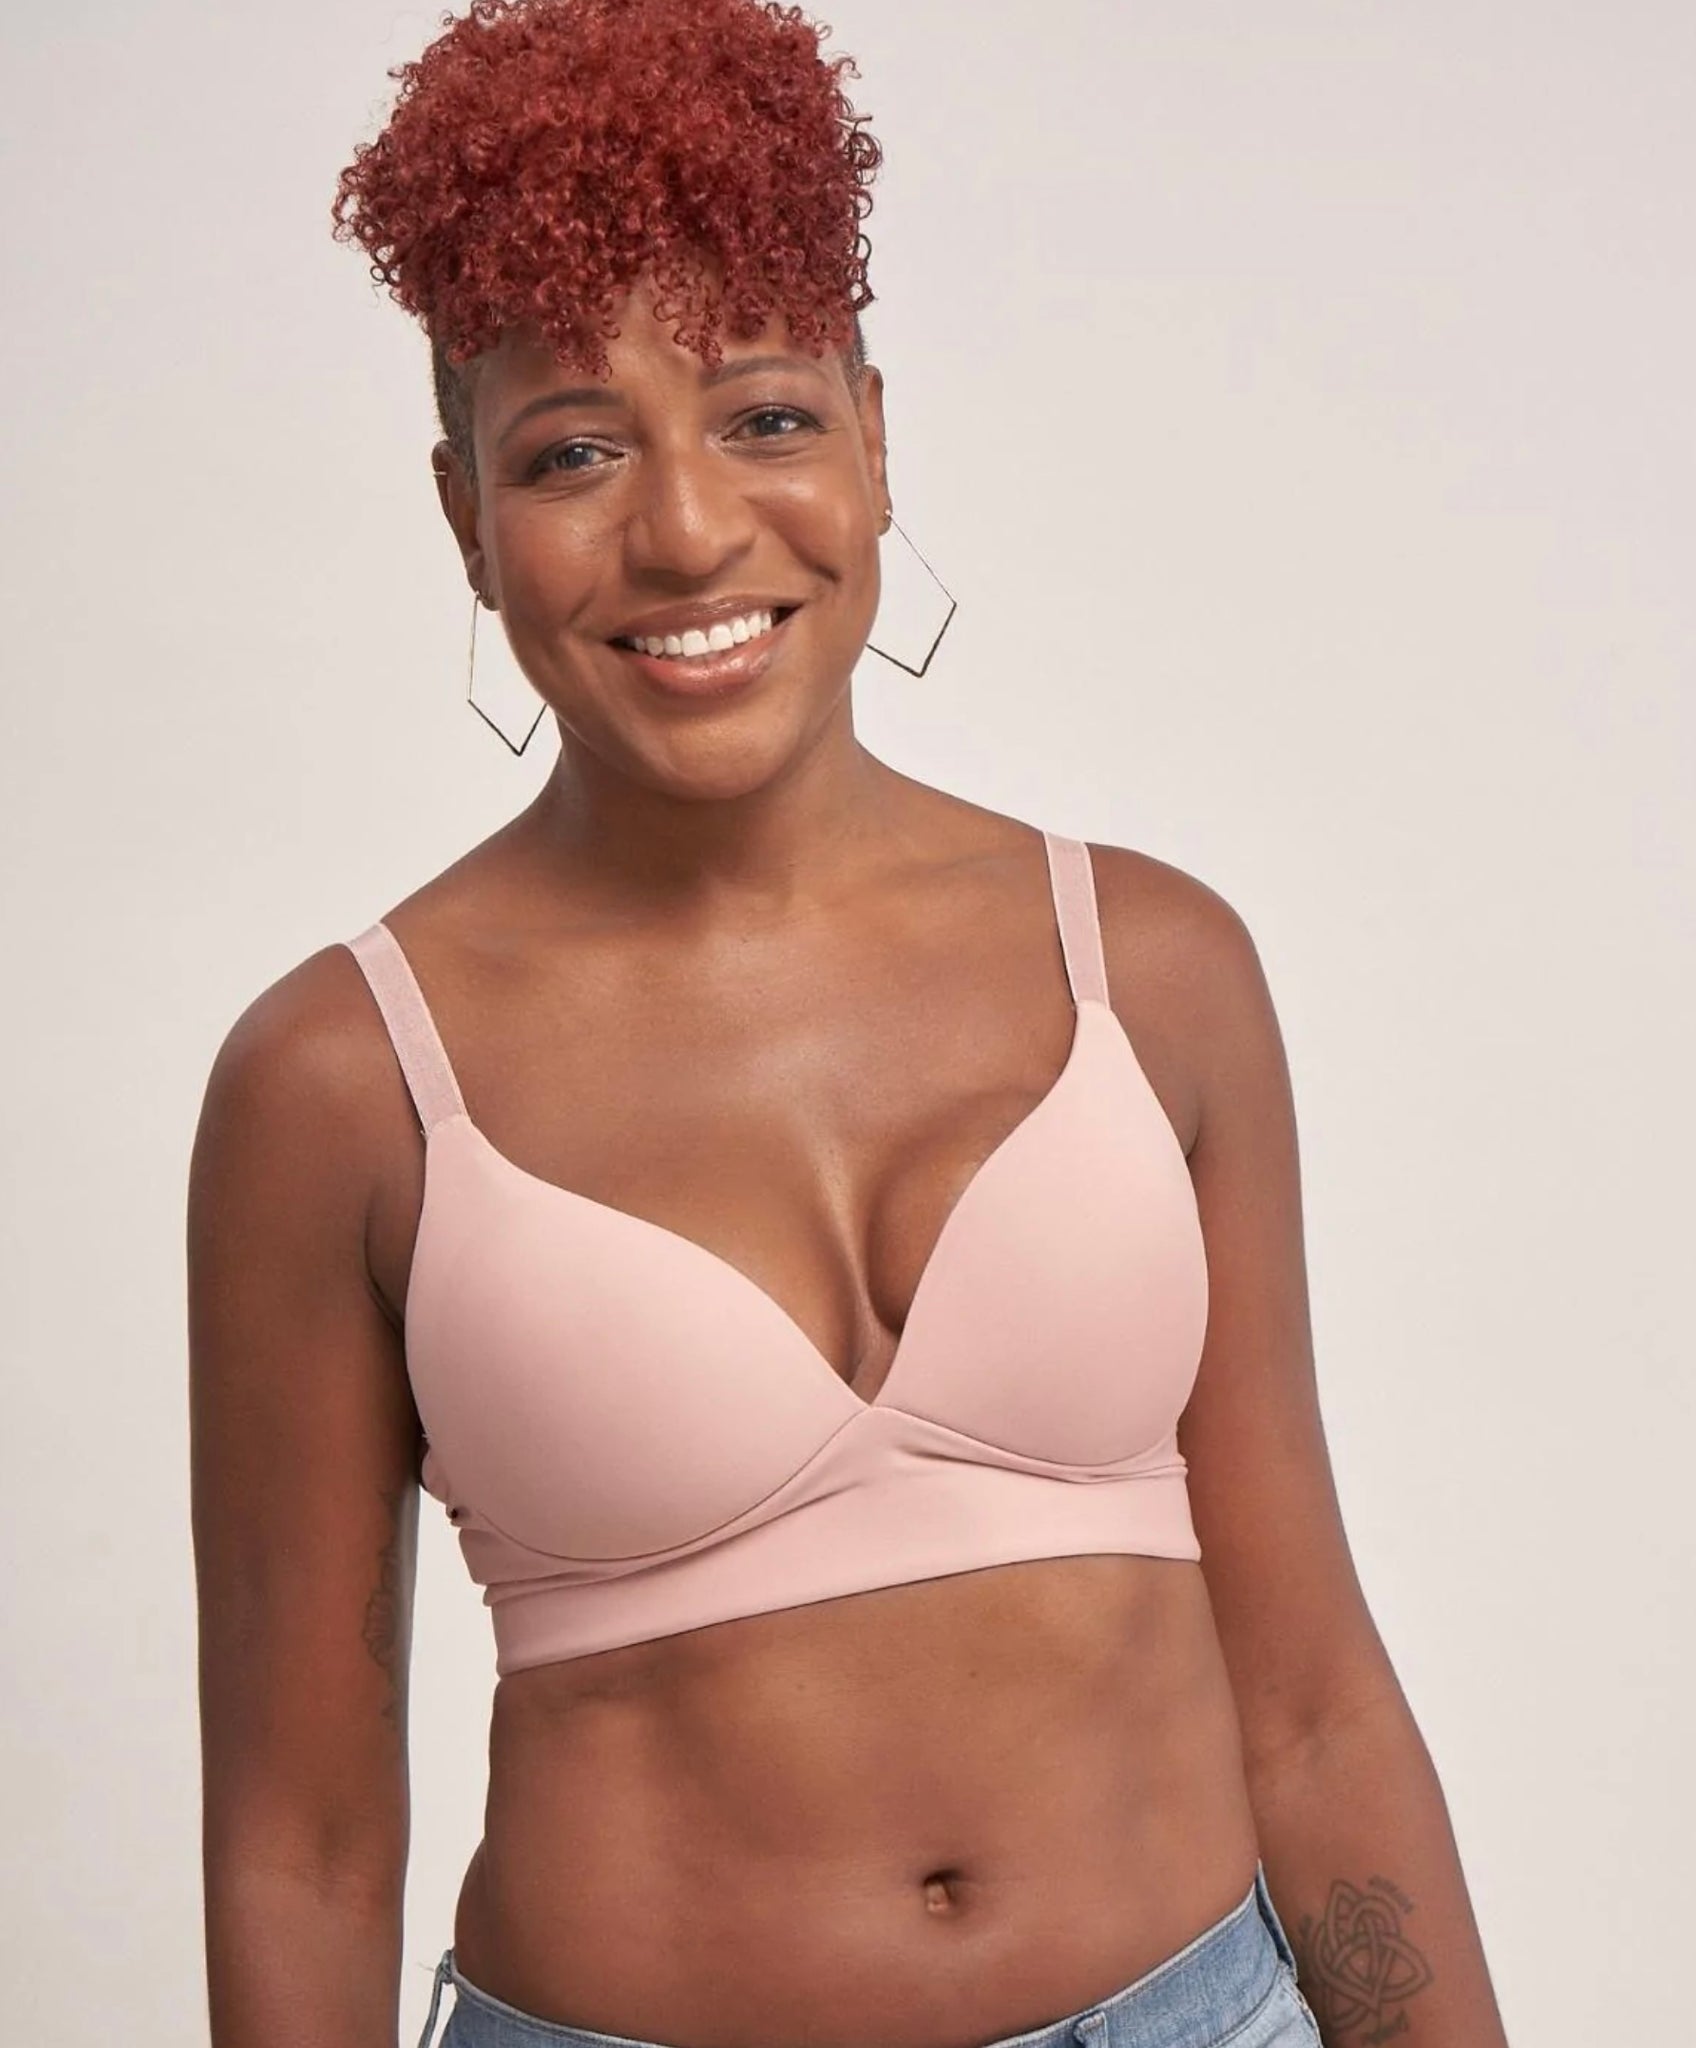 Delilah Wireless Mastectomy Bralette AO-019 – The Full Cup